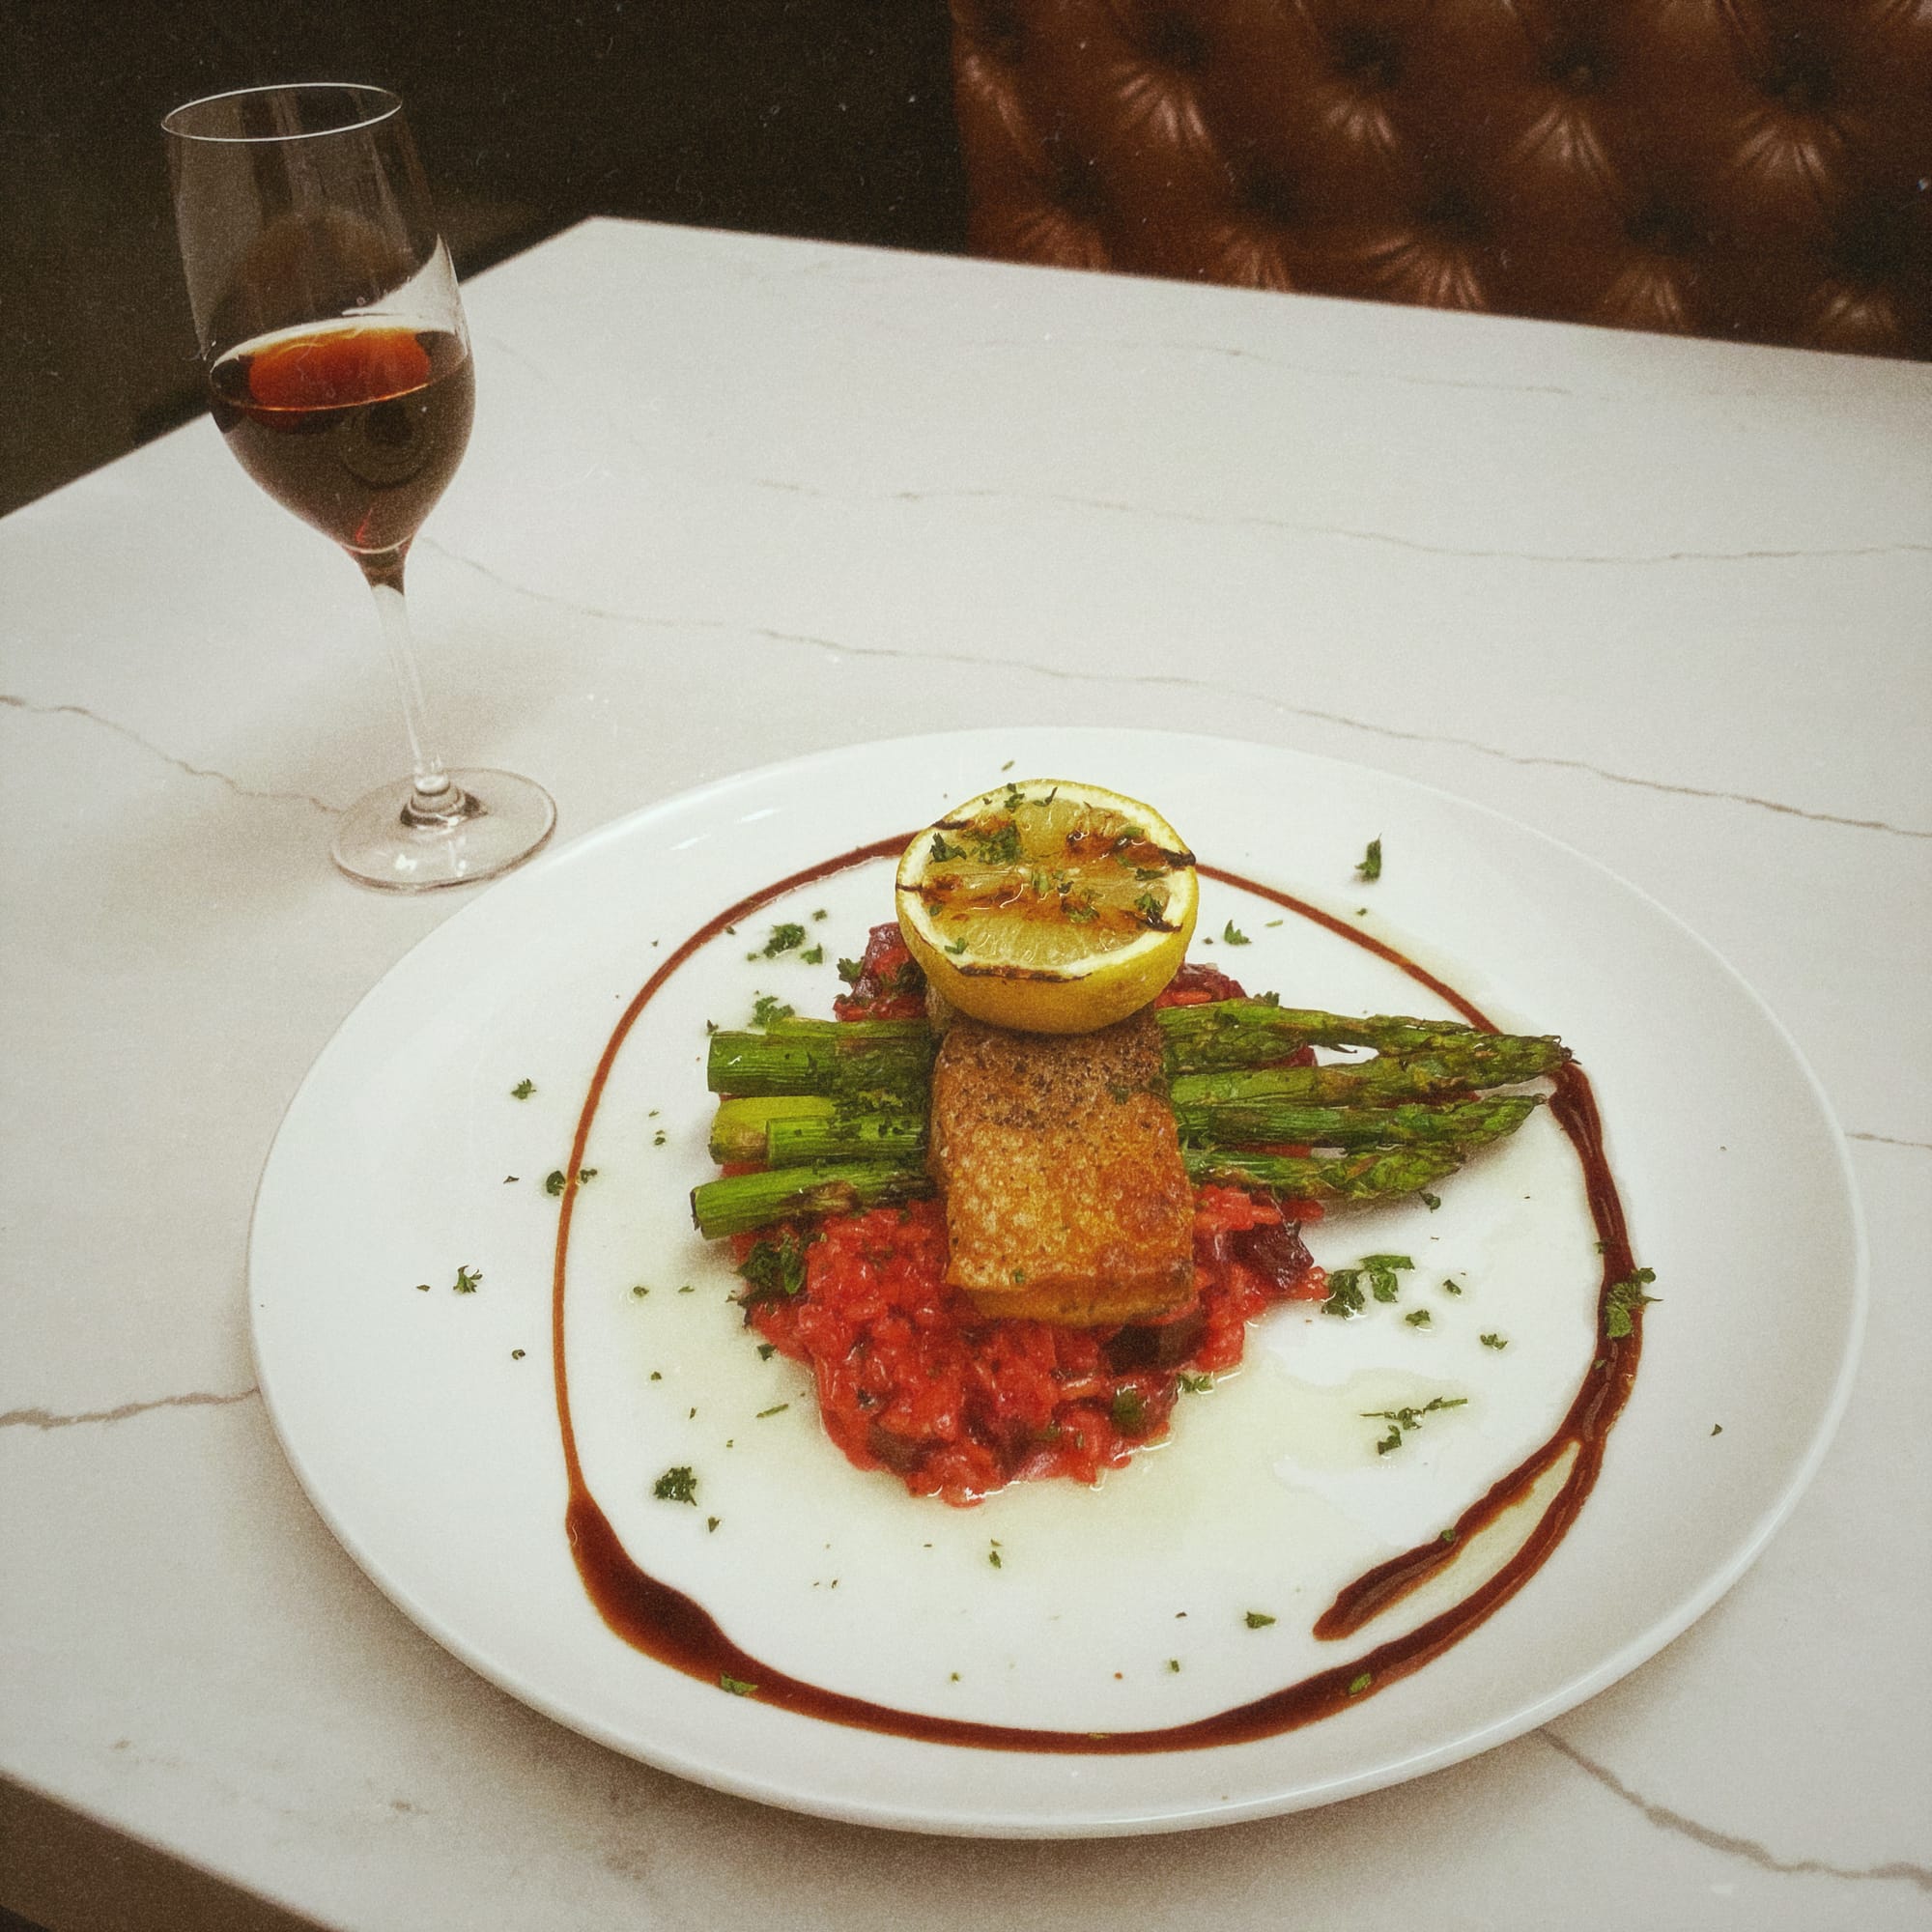 Large white plate with beet risotto piled in the middle, with stalks of asparagus, a filet of salmon, and a grilled lemon wedge stacked sequentially on top. A drizzle of a dark sauce encircles the food.